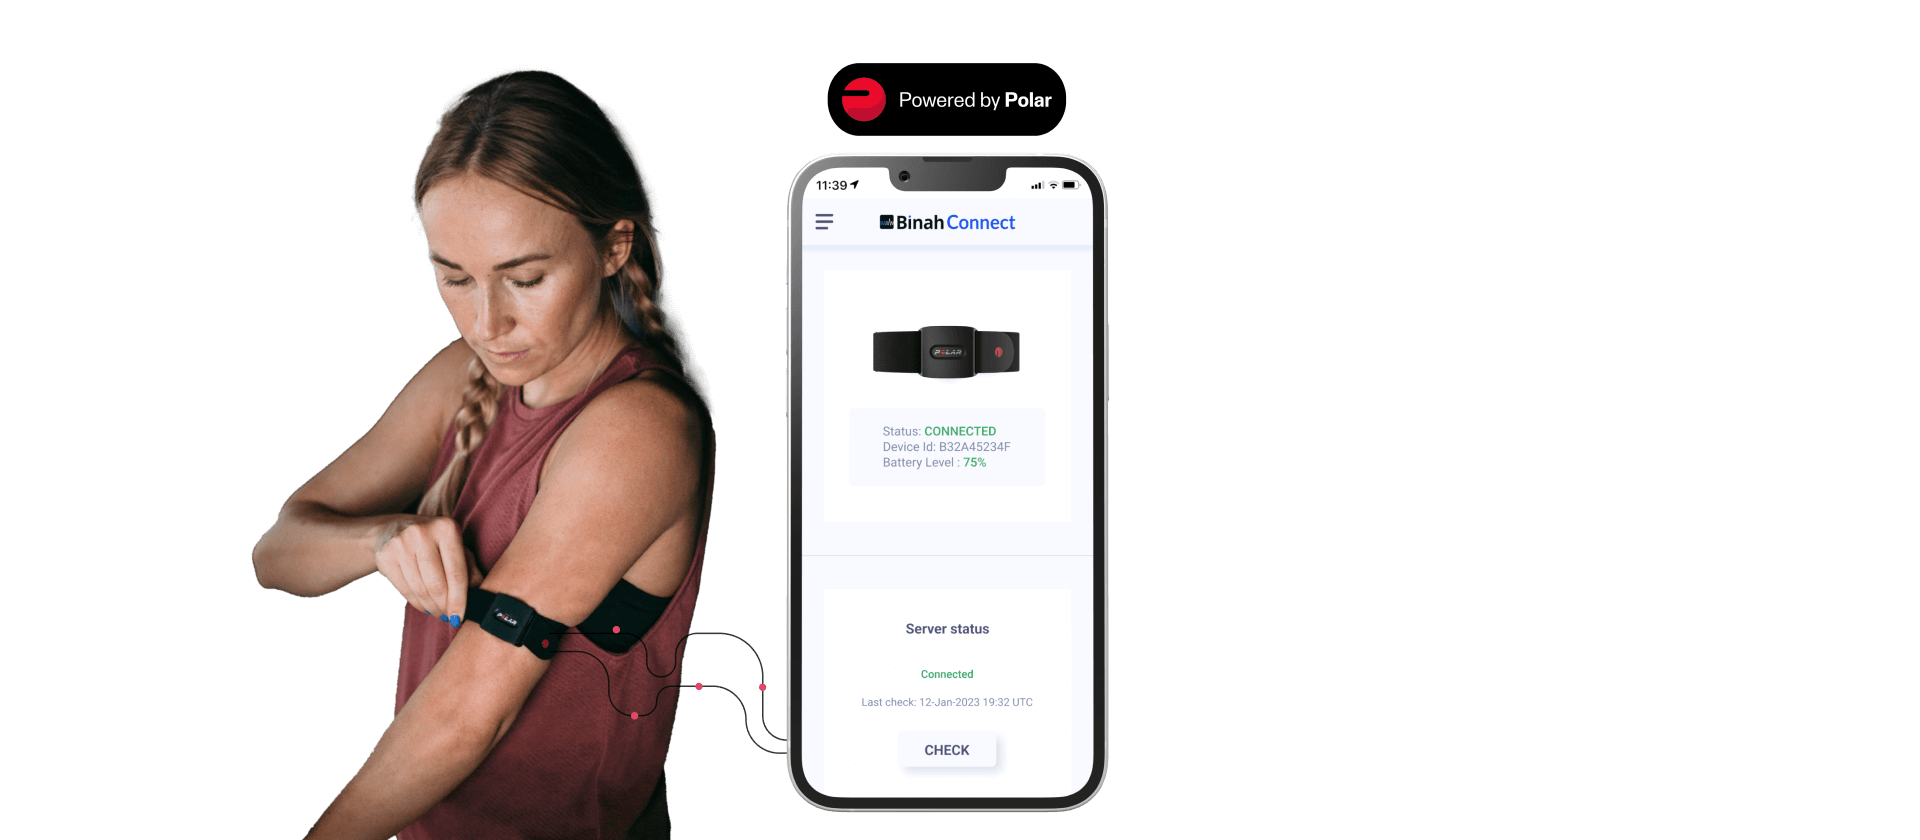 Binah.ai Partners with Polar to Provide  Continuous Health and Wellness Monitoring 0